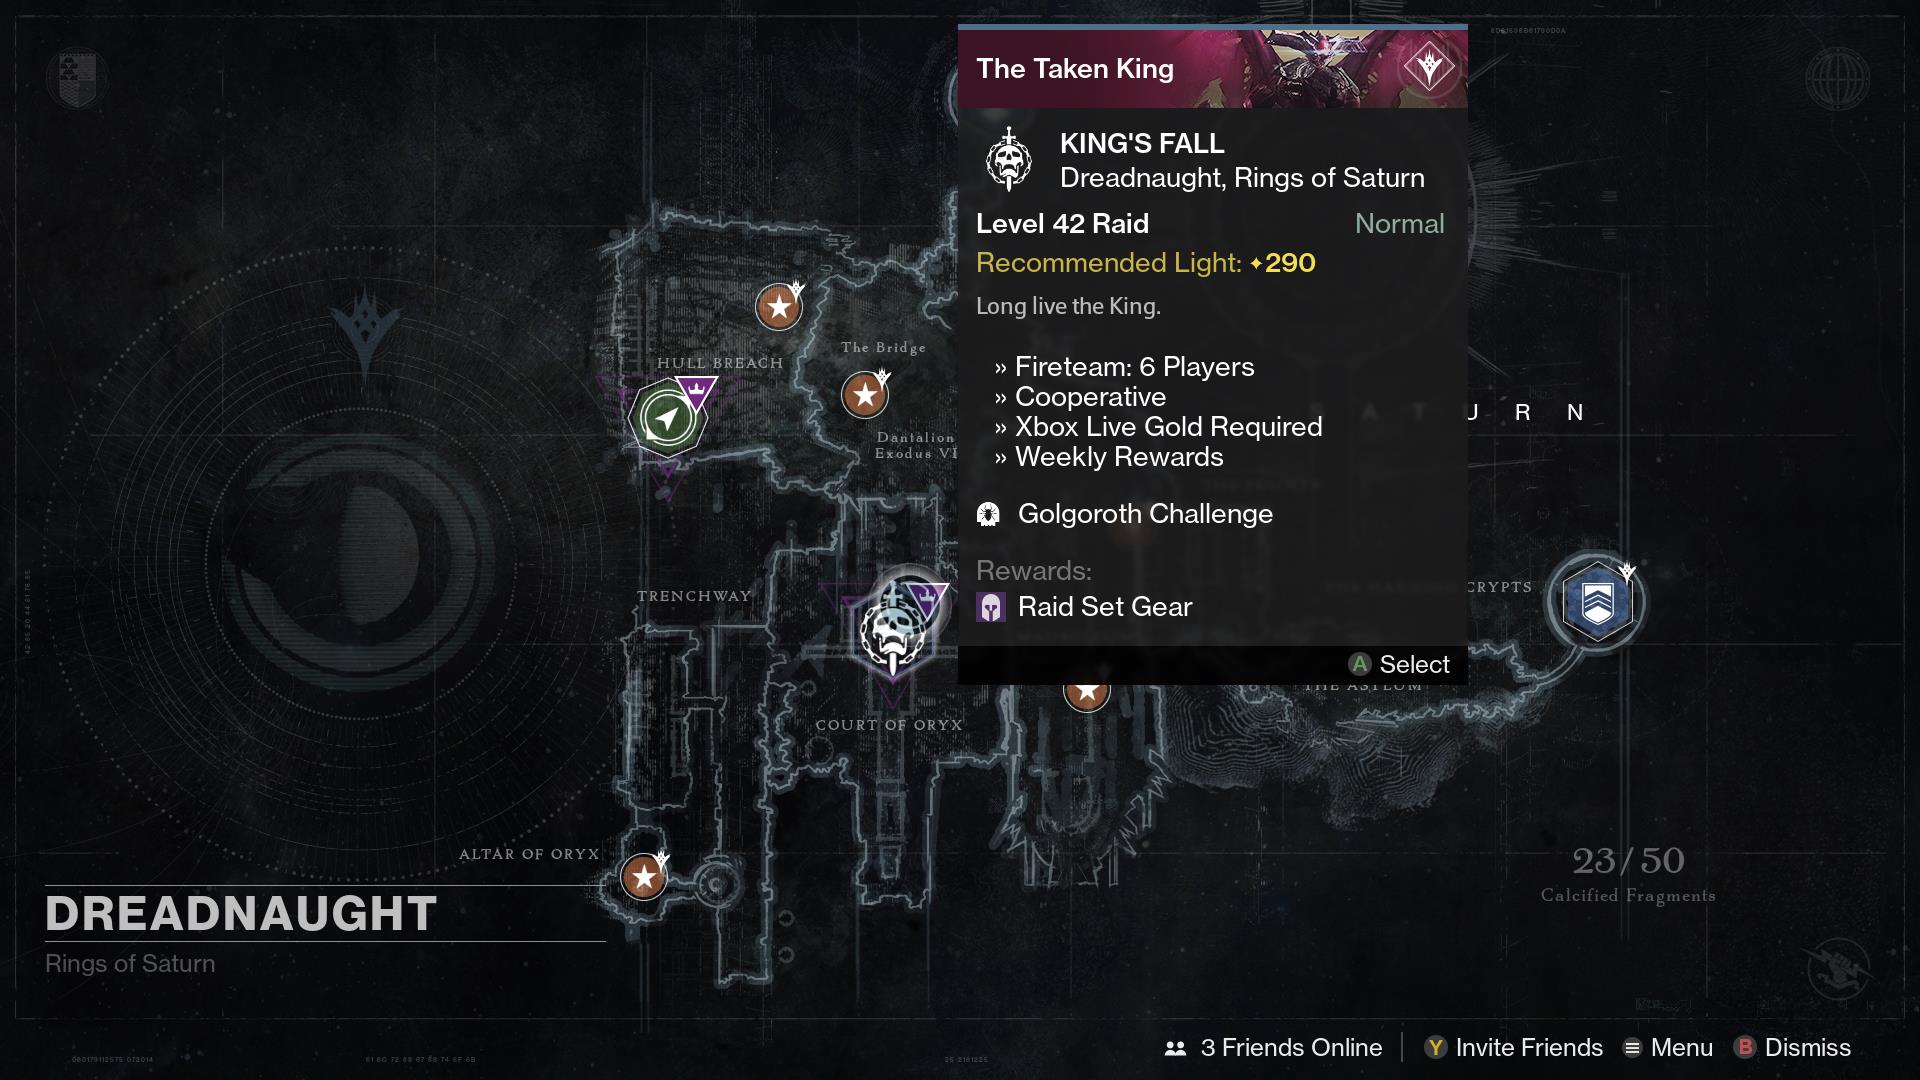 Image for Destiny weekly reset for August 30 – Court of Oryx, Nightfall, Prison of Elders changes detailed